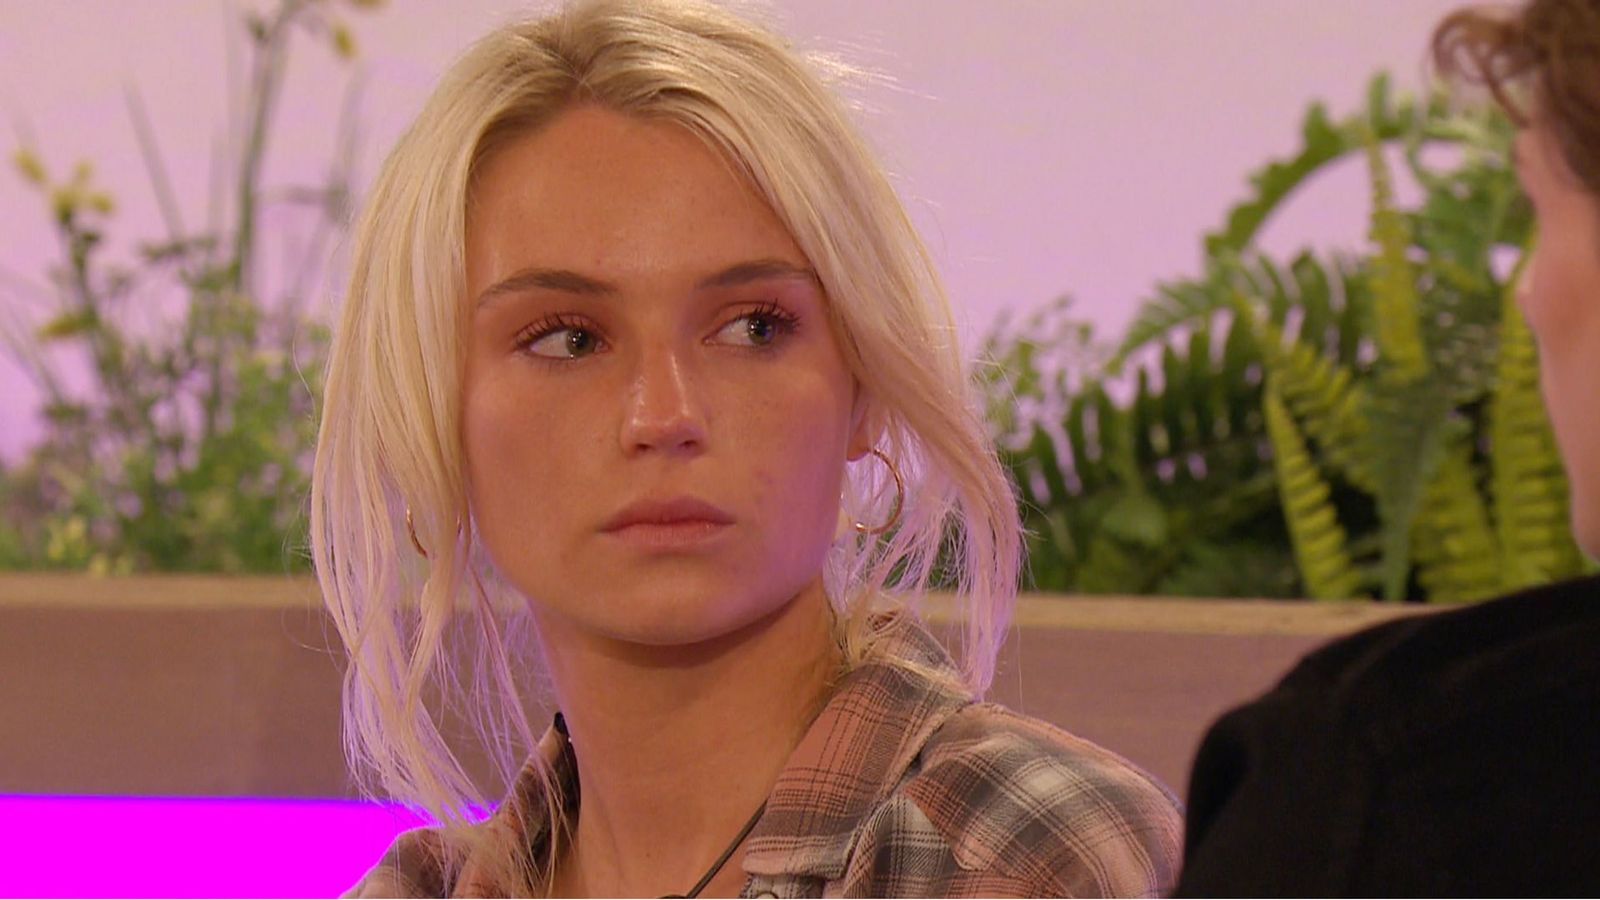 Love Island: Ofcom clears episode with 700 complaints over treatment of Lucie Donlan